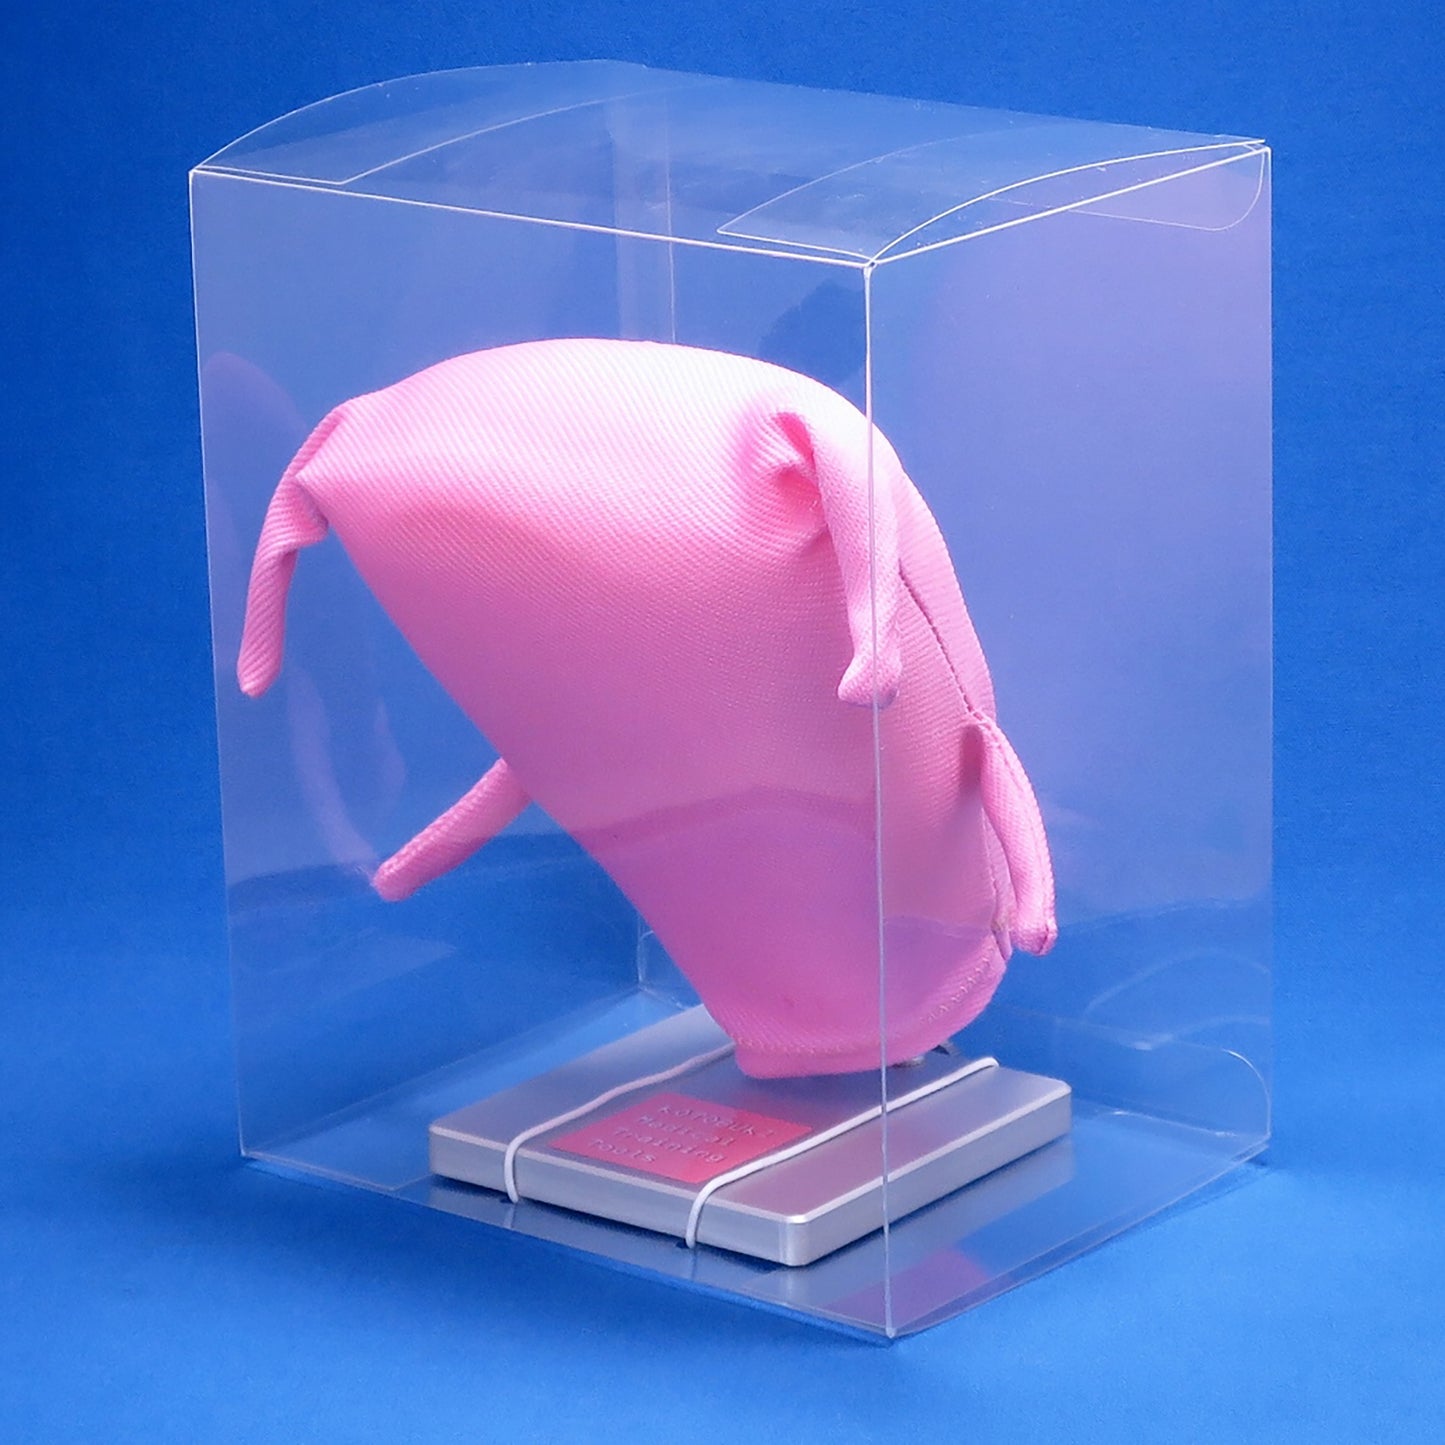 The parallel position Laparoscopic Myectomy Model in a clear plastic box against a blue background. 